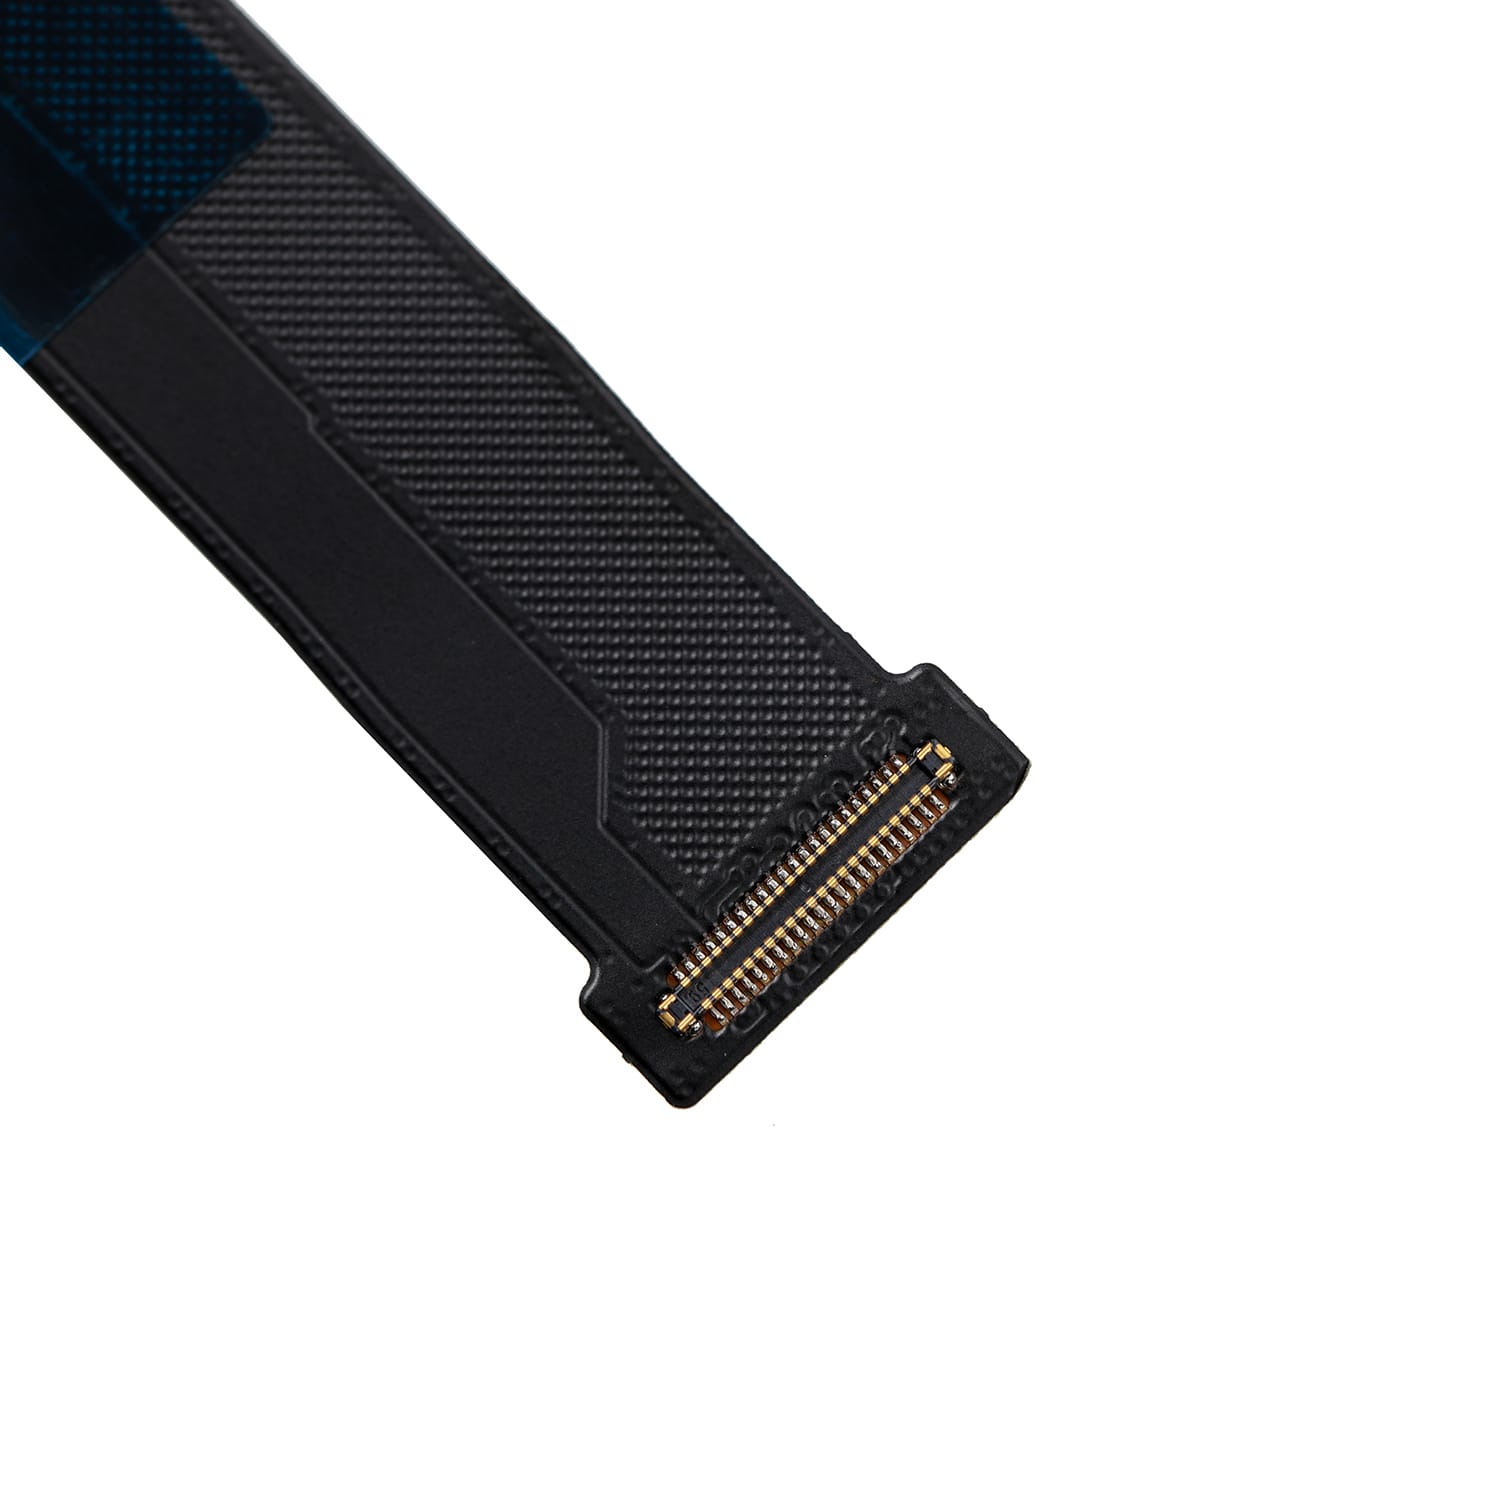 AUDIO BOARD RIBBON CABLE FOR MACBOOK AIR 13" A1932 (LATE 2018-MID 2019)